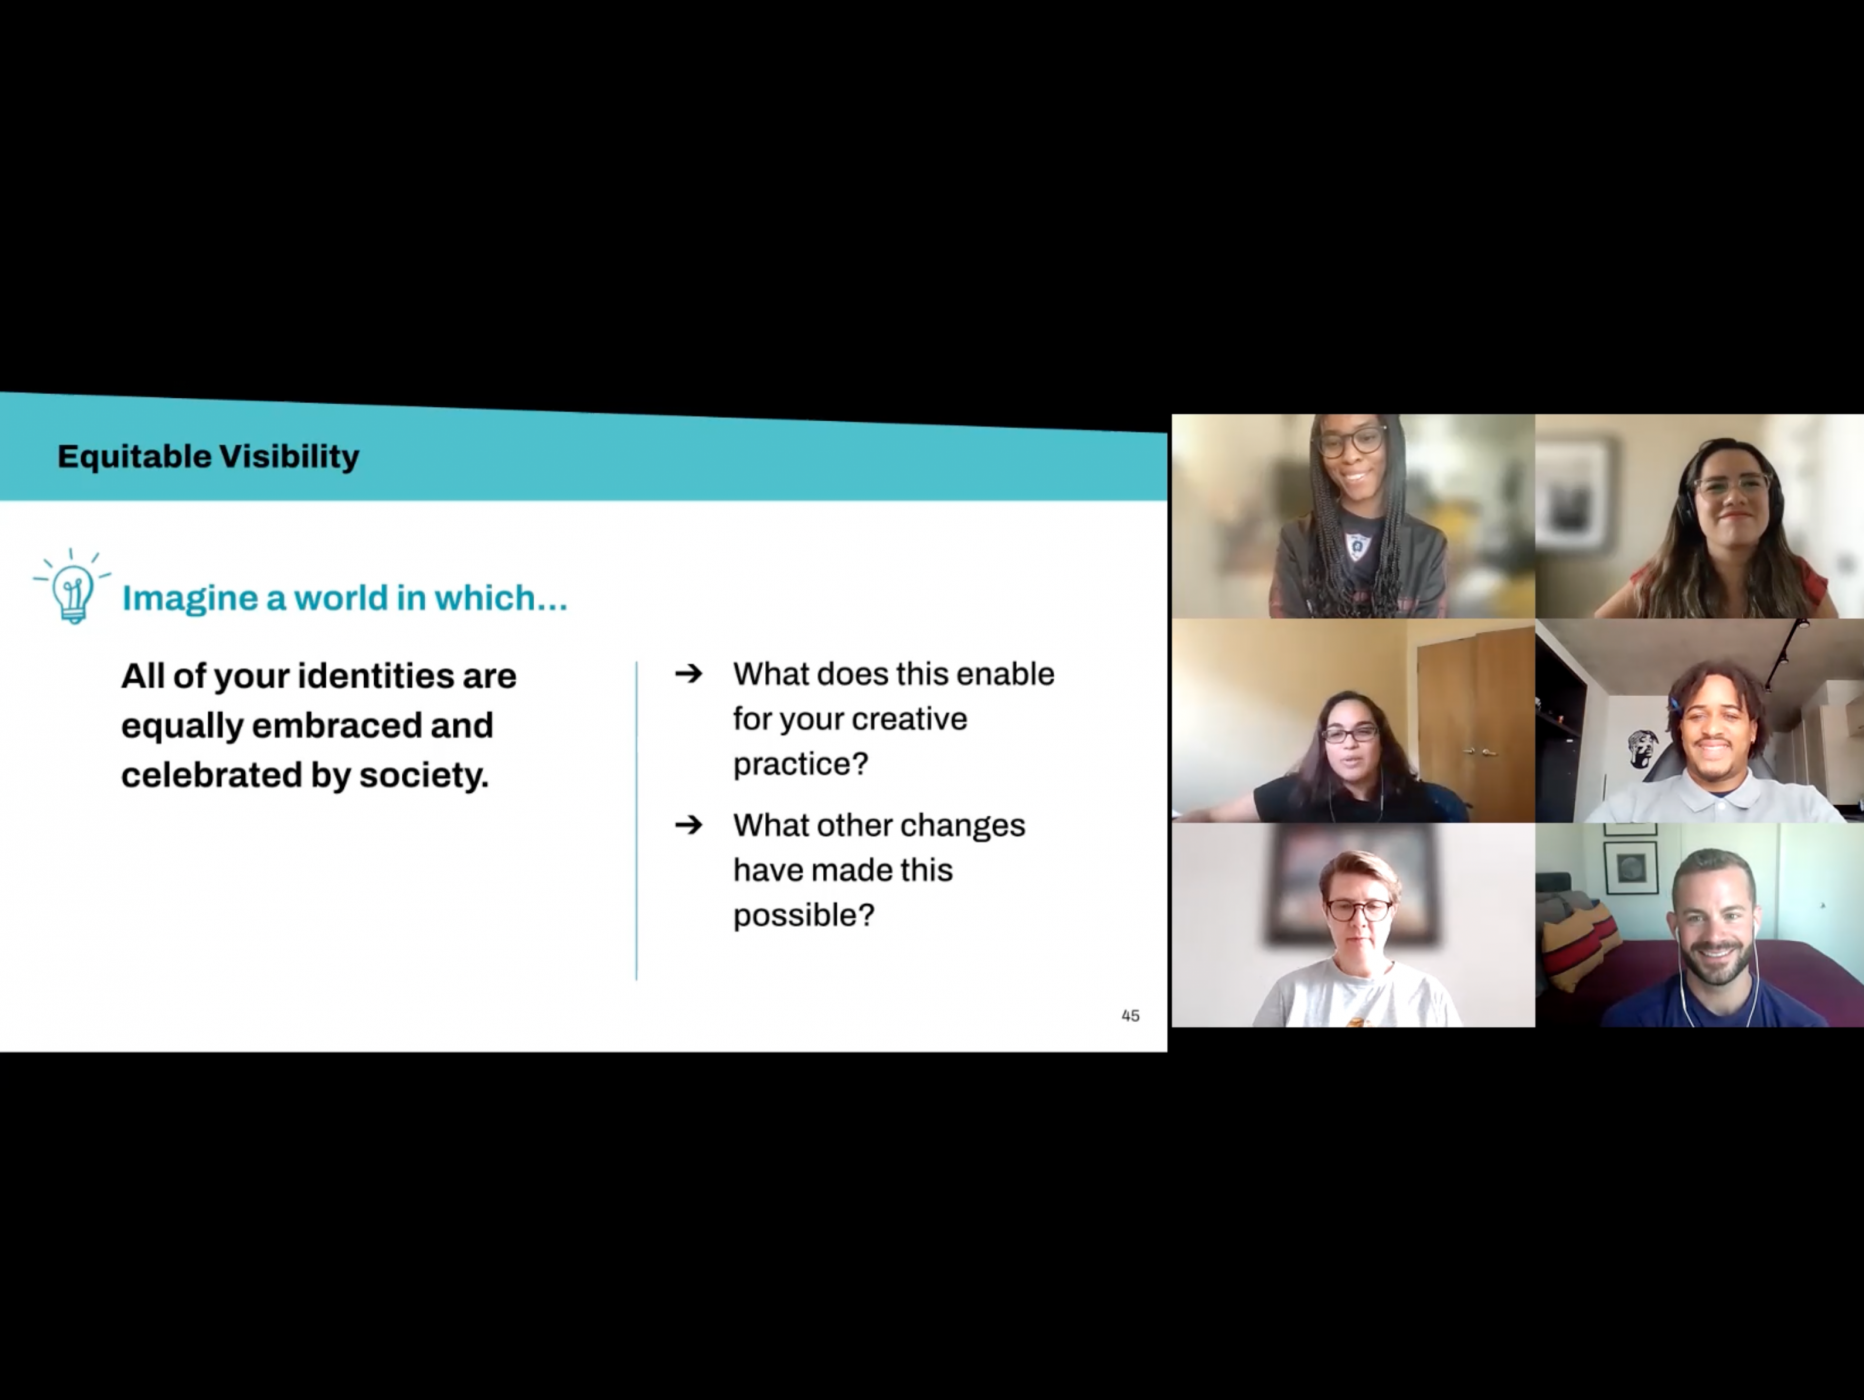 screenshot from a Zoom meeting; slide on the left with text and a teal header, grid of 6 smiling faces on the right